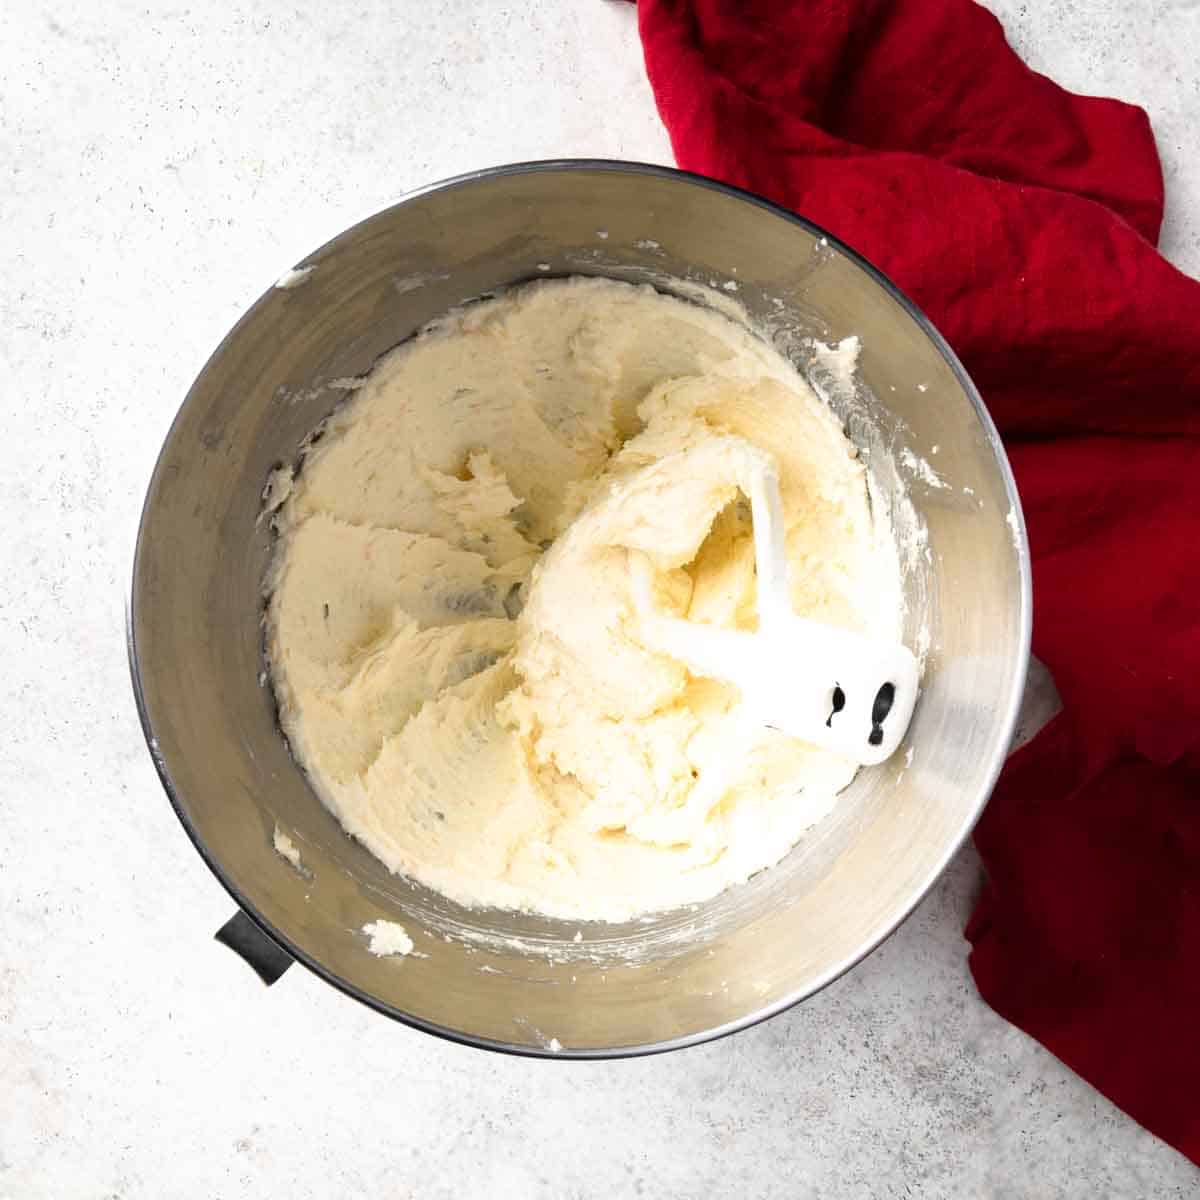 Fluffy butter and orange sugar creamed together in a stand mixer bowl.